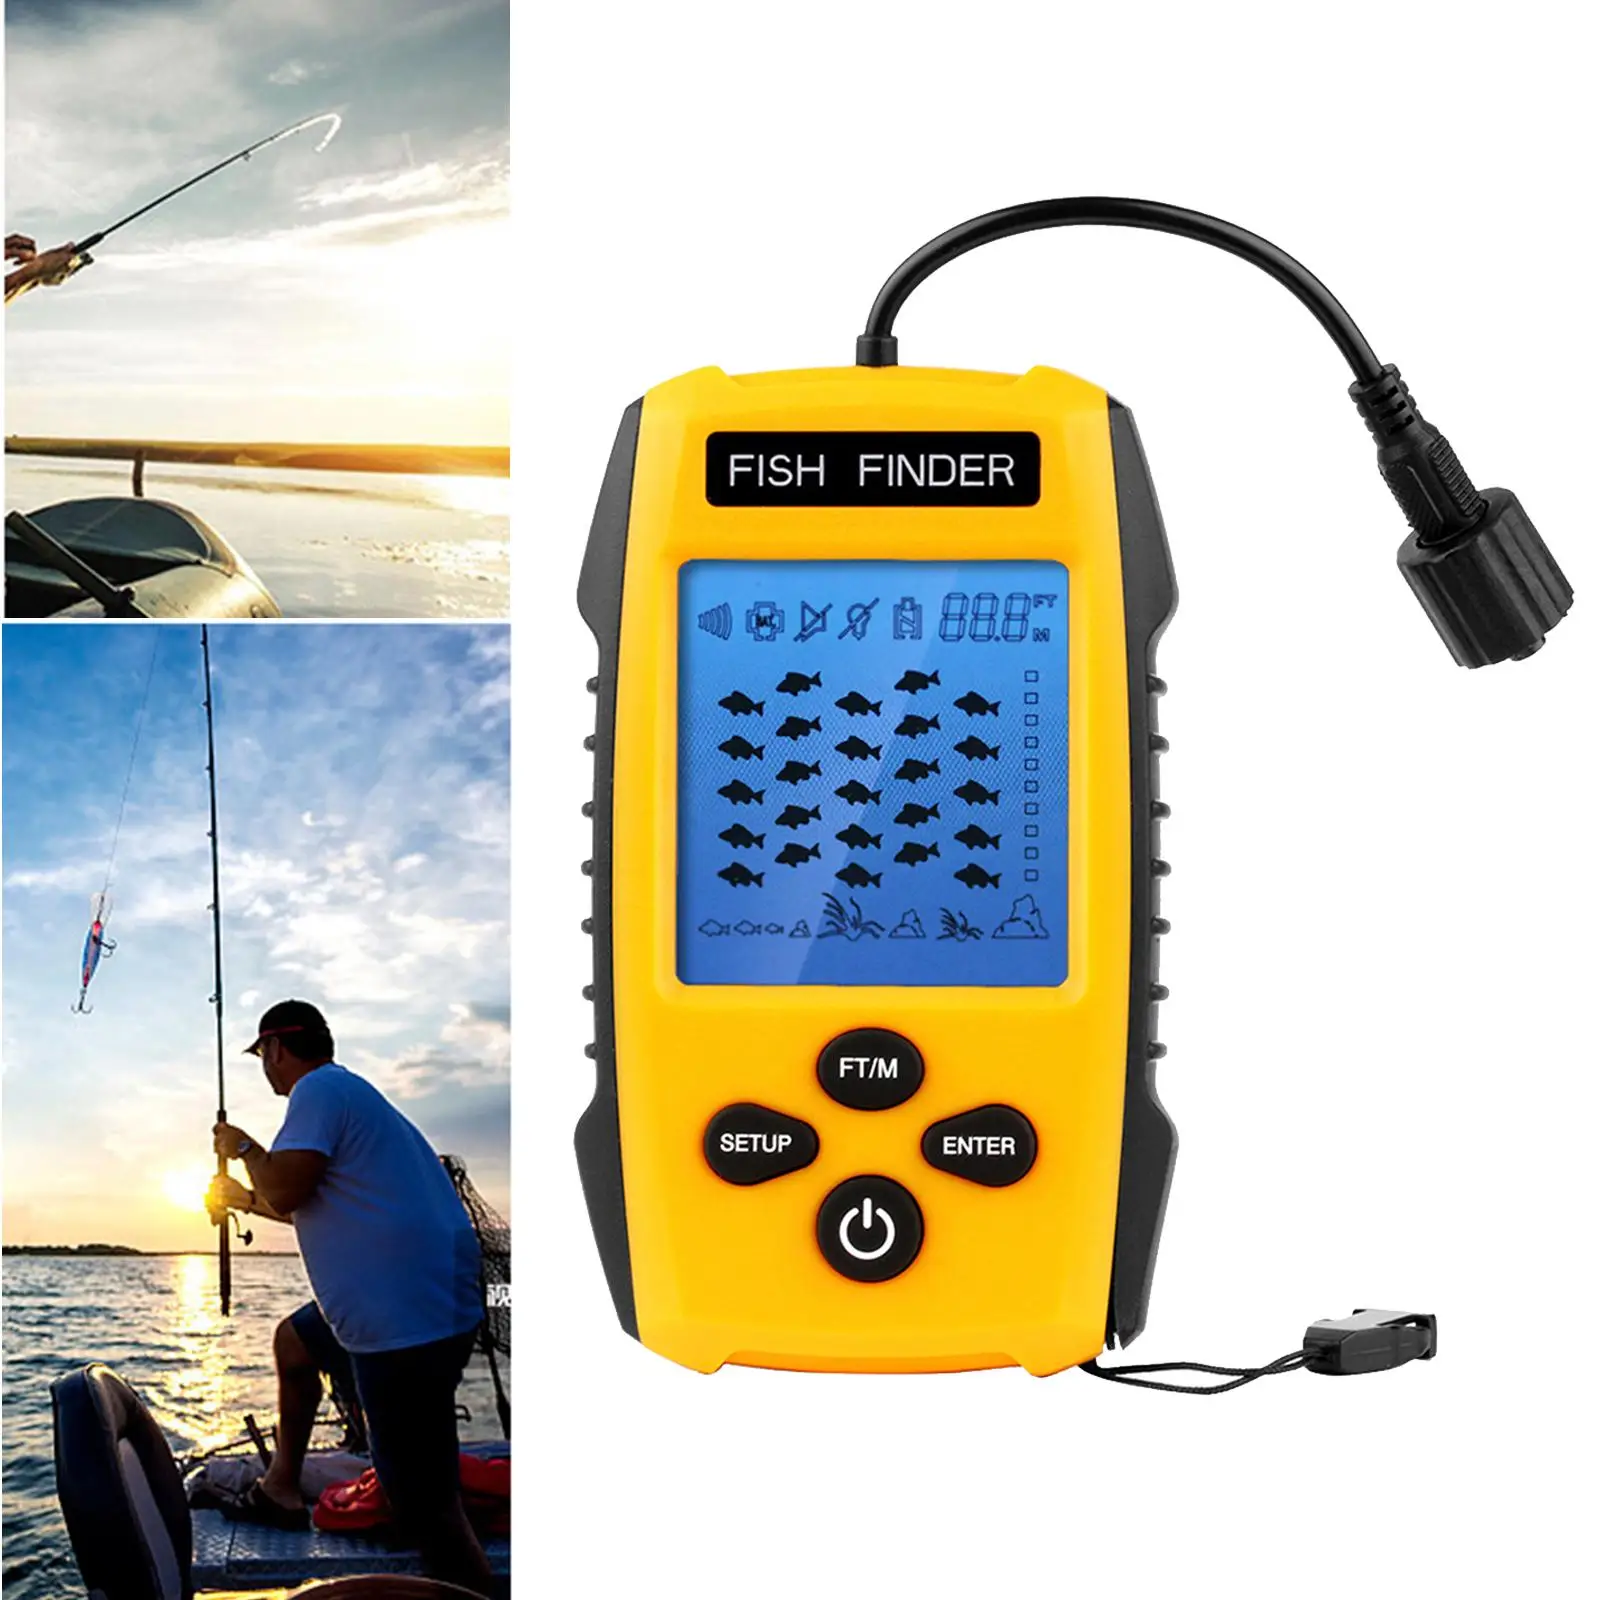 Portable Fish Finder Handheld Fishfinder Fishing Gear with Sonar Transducer, LCD Display (Yellow)